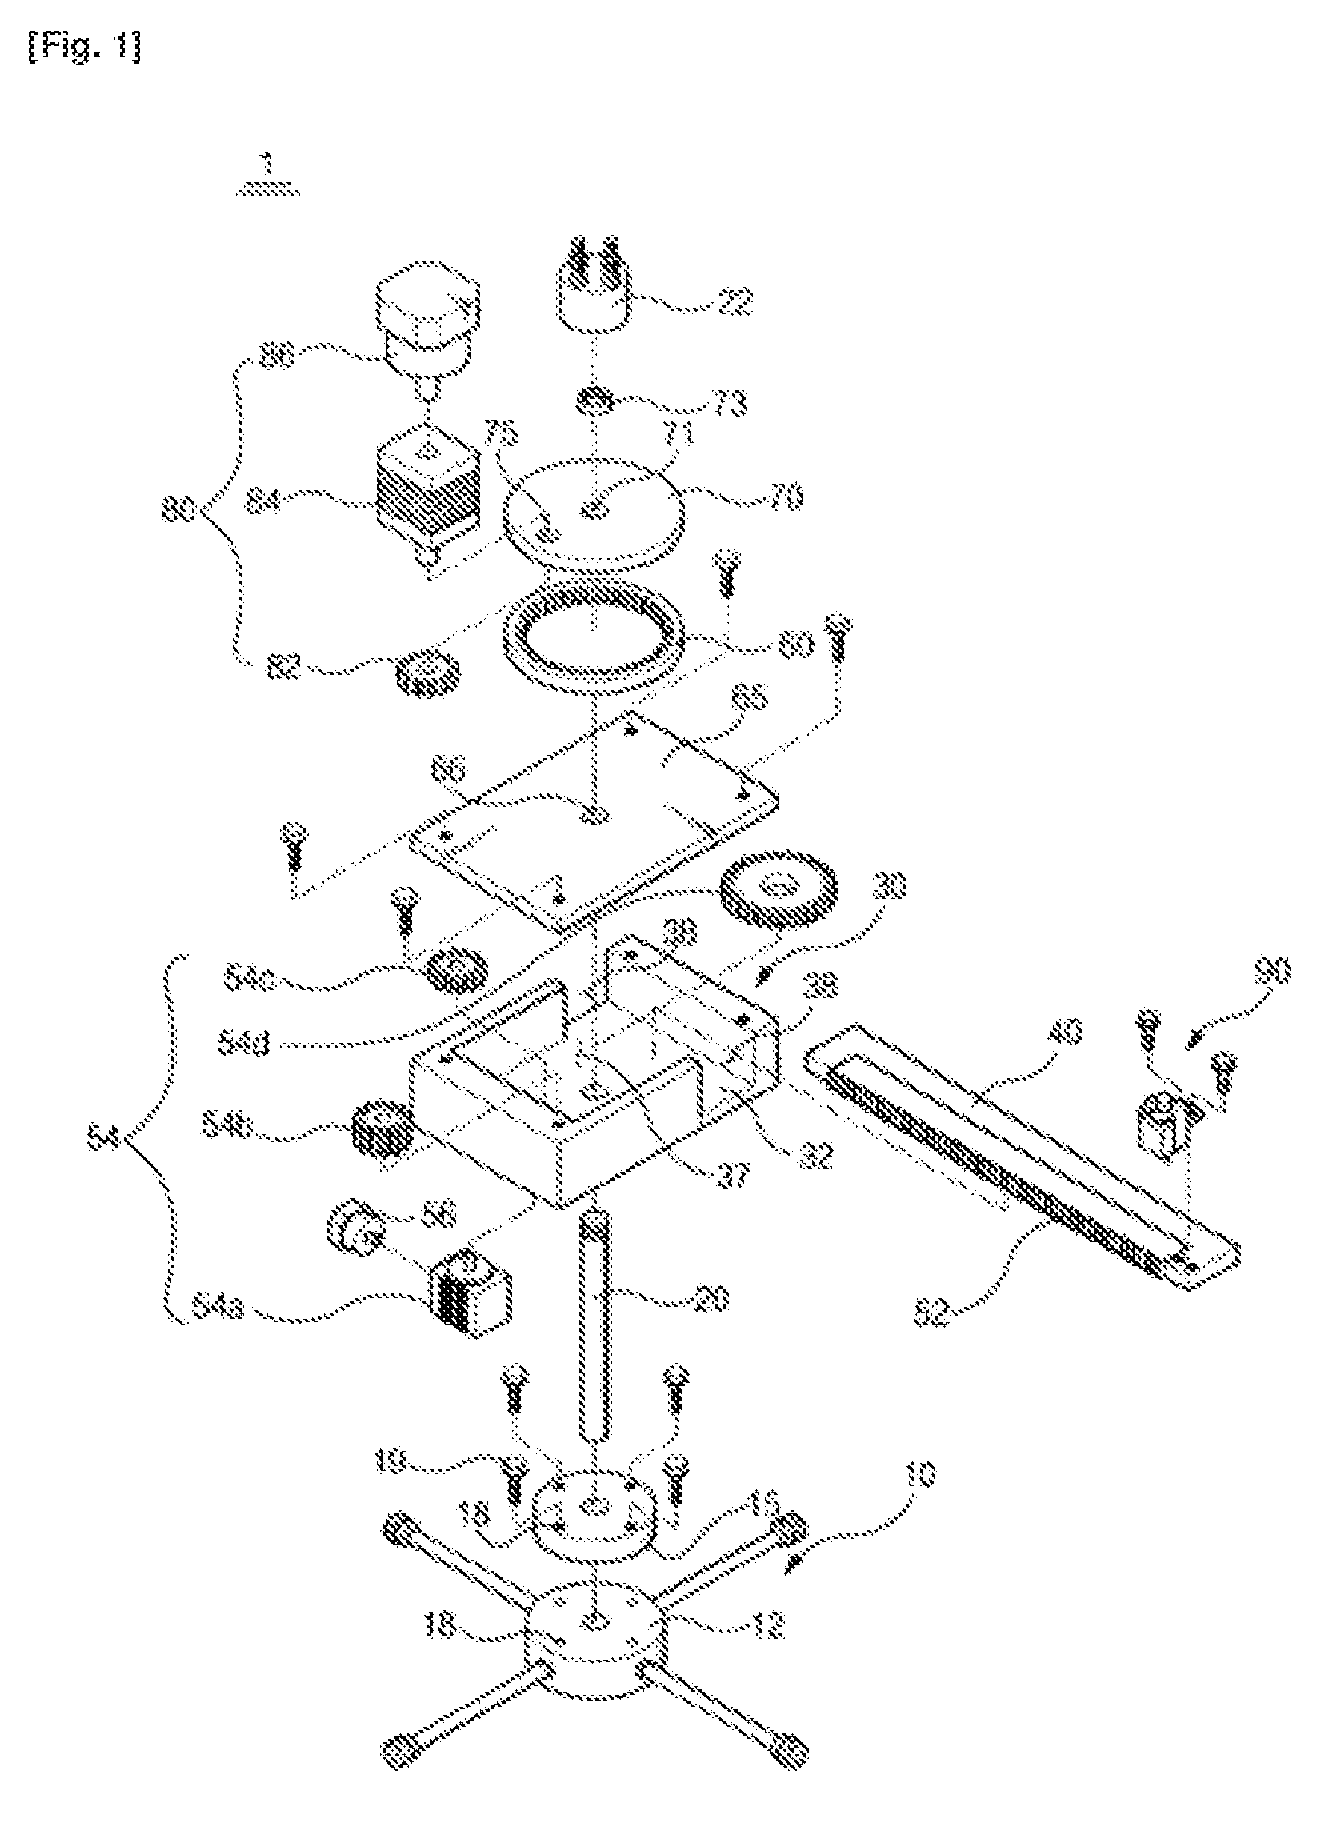 Automatic flange surface machining apparatus